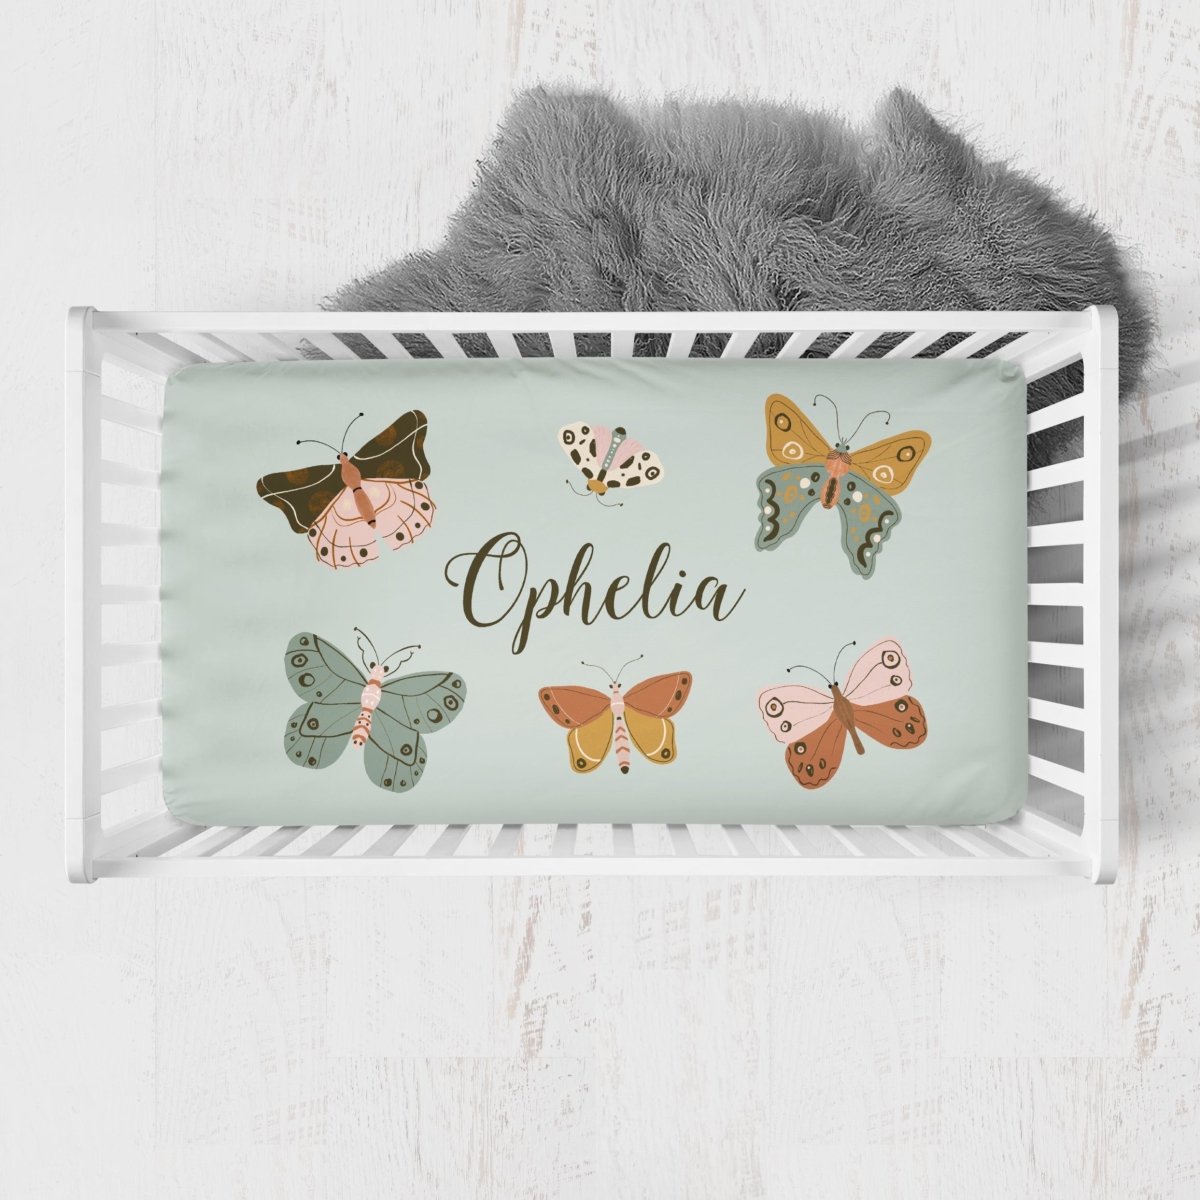 Vintage Butterfly Personalized Crib Sheet - gender_girl, Personalized_Yes, text